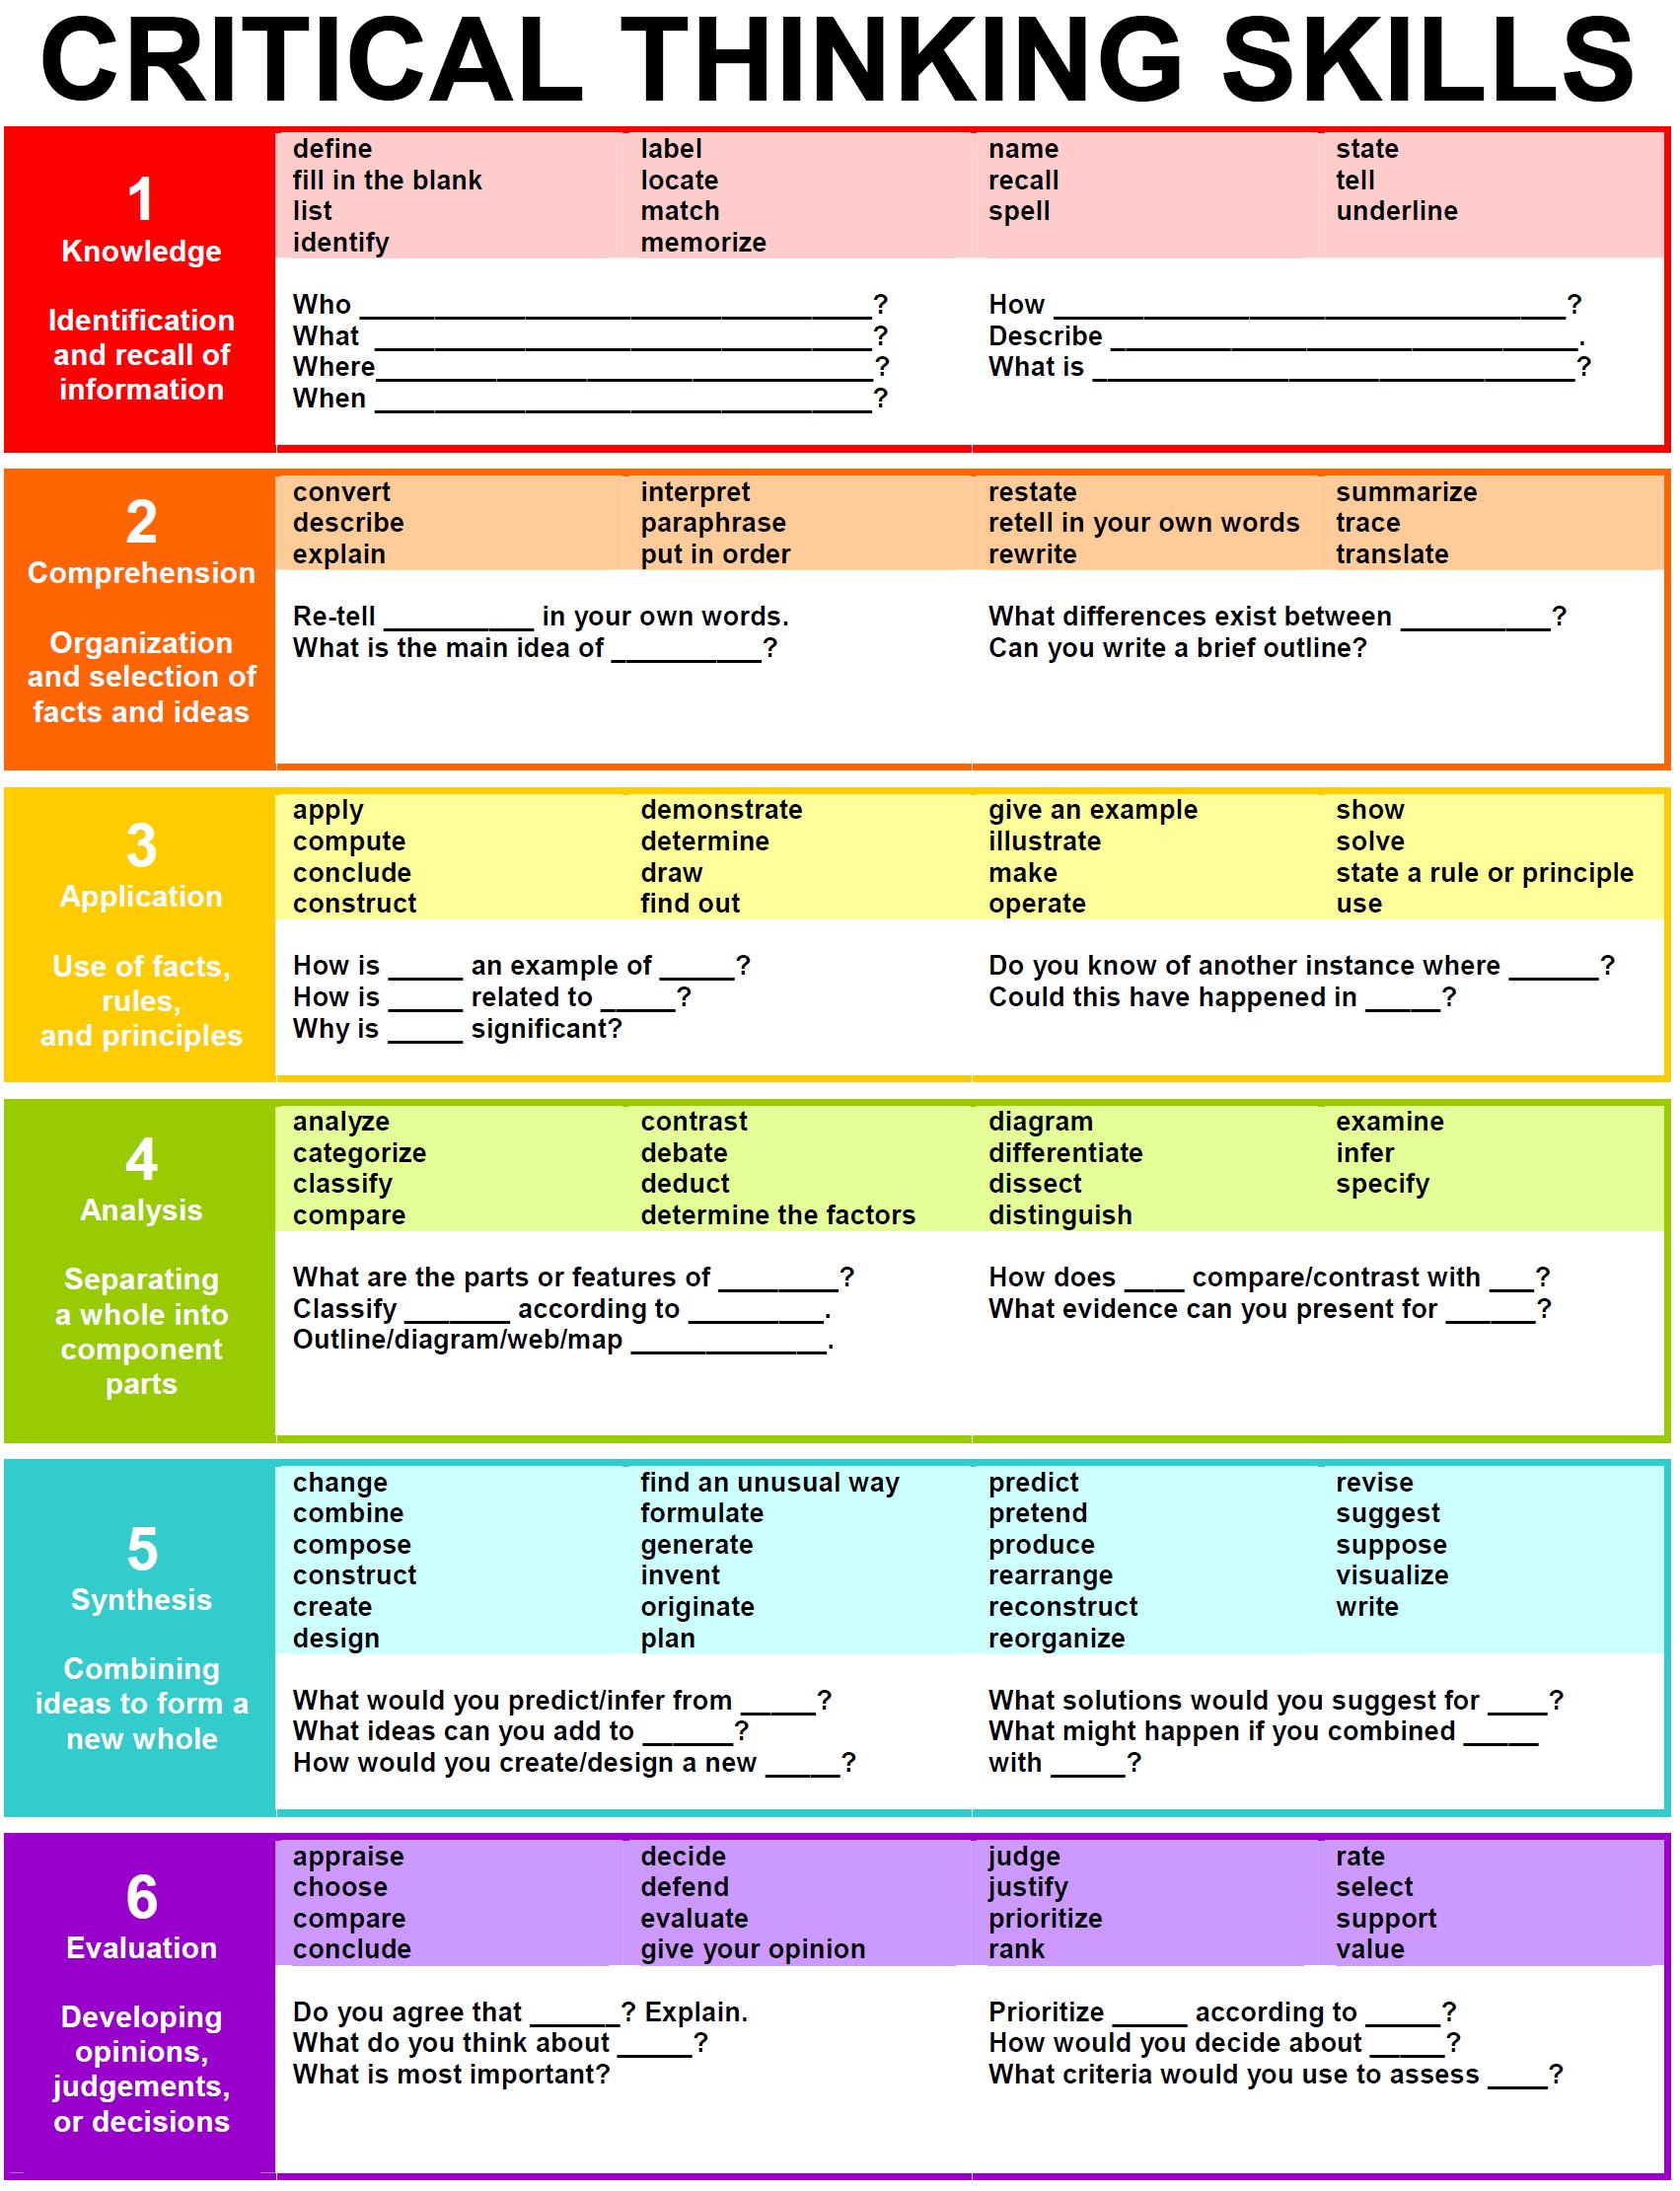 Chart of Bloom's Taxonomy levels and good questions to ask and think about while reading. See link below for more accessible version of this chart.